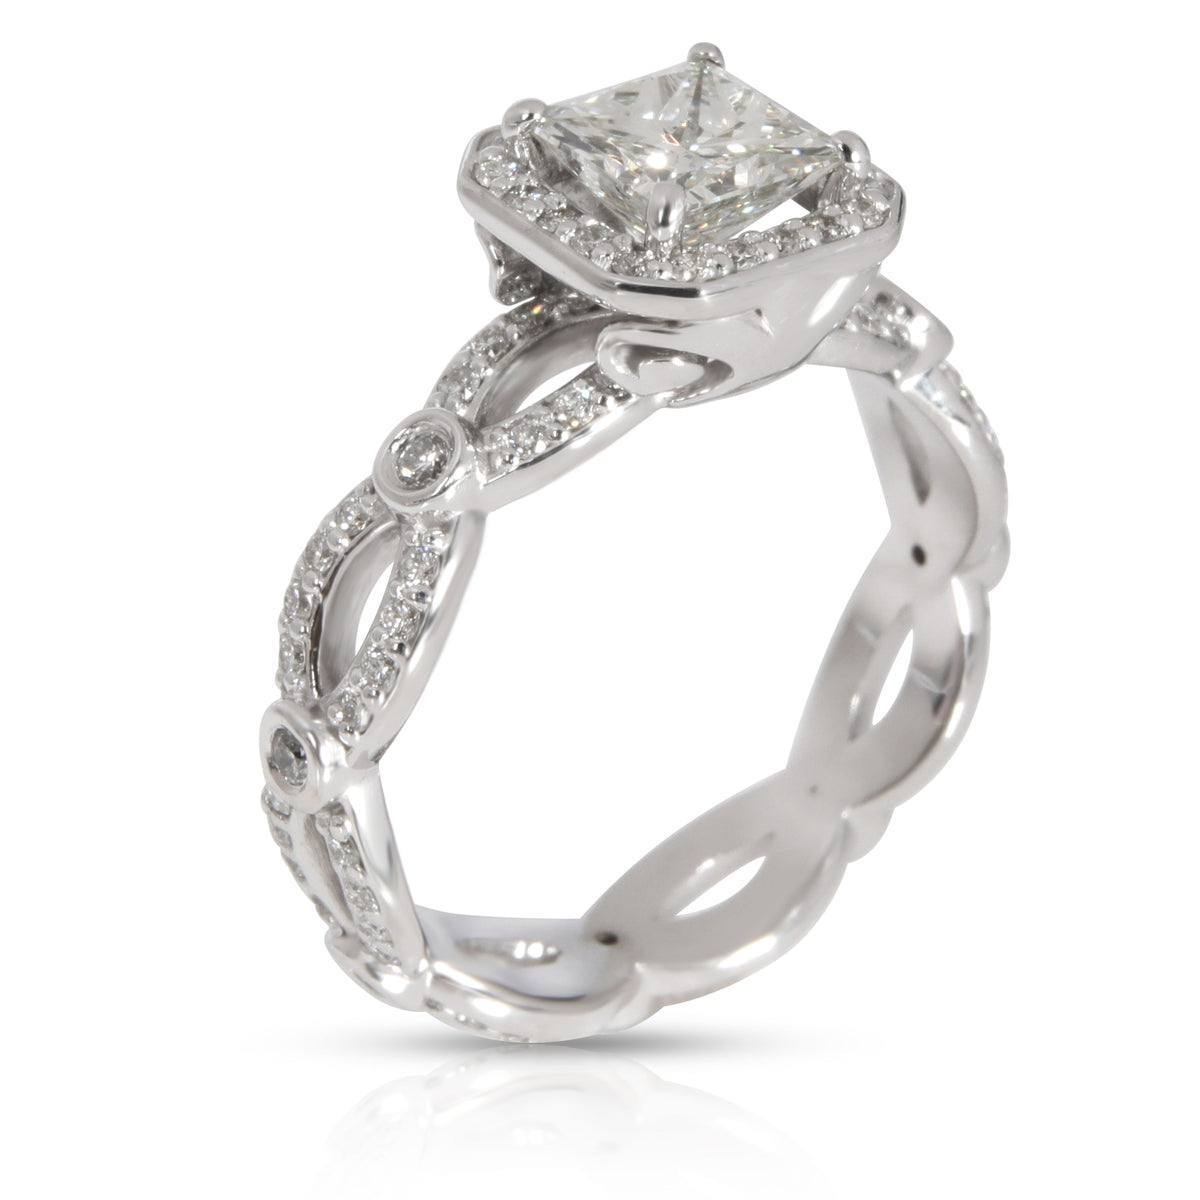 Halo Princess Diamond Engagement Ring in 14K White Gold H SI1 1.34 CTW